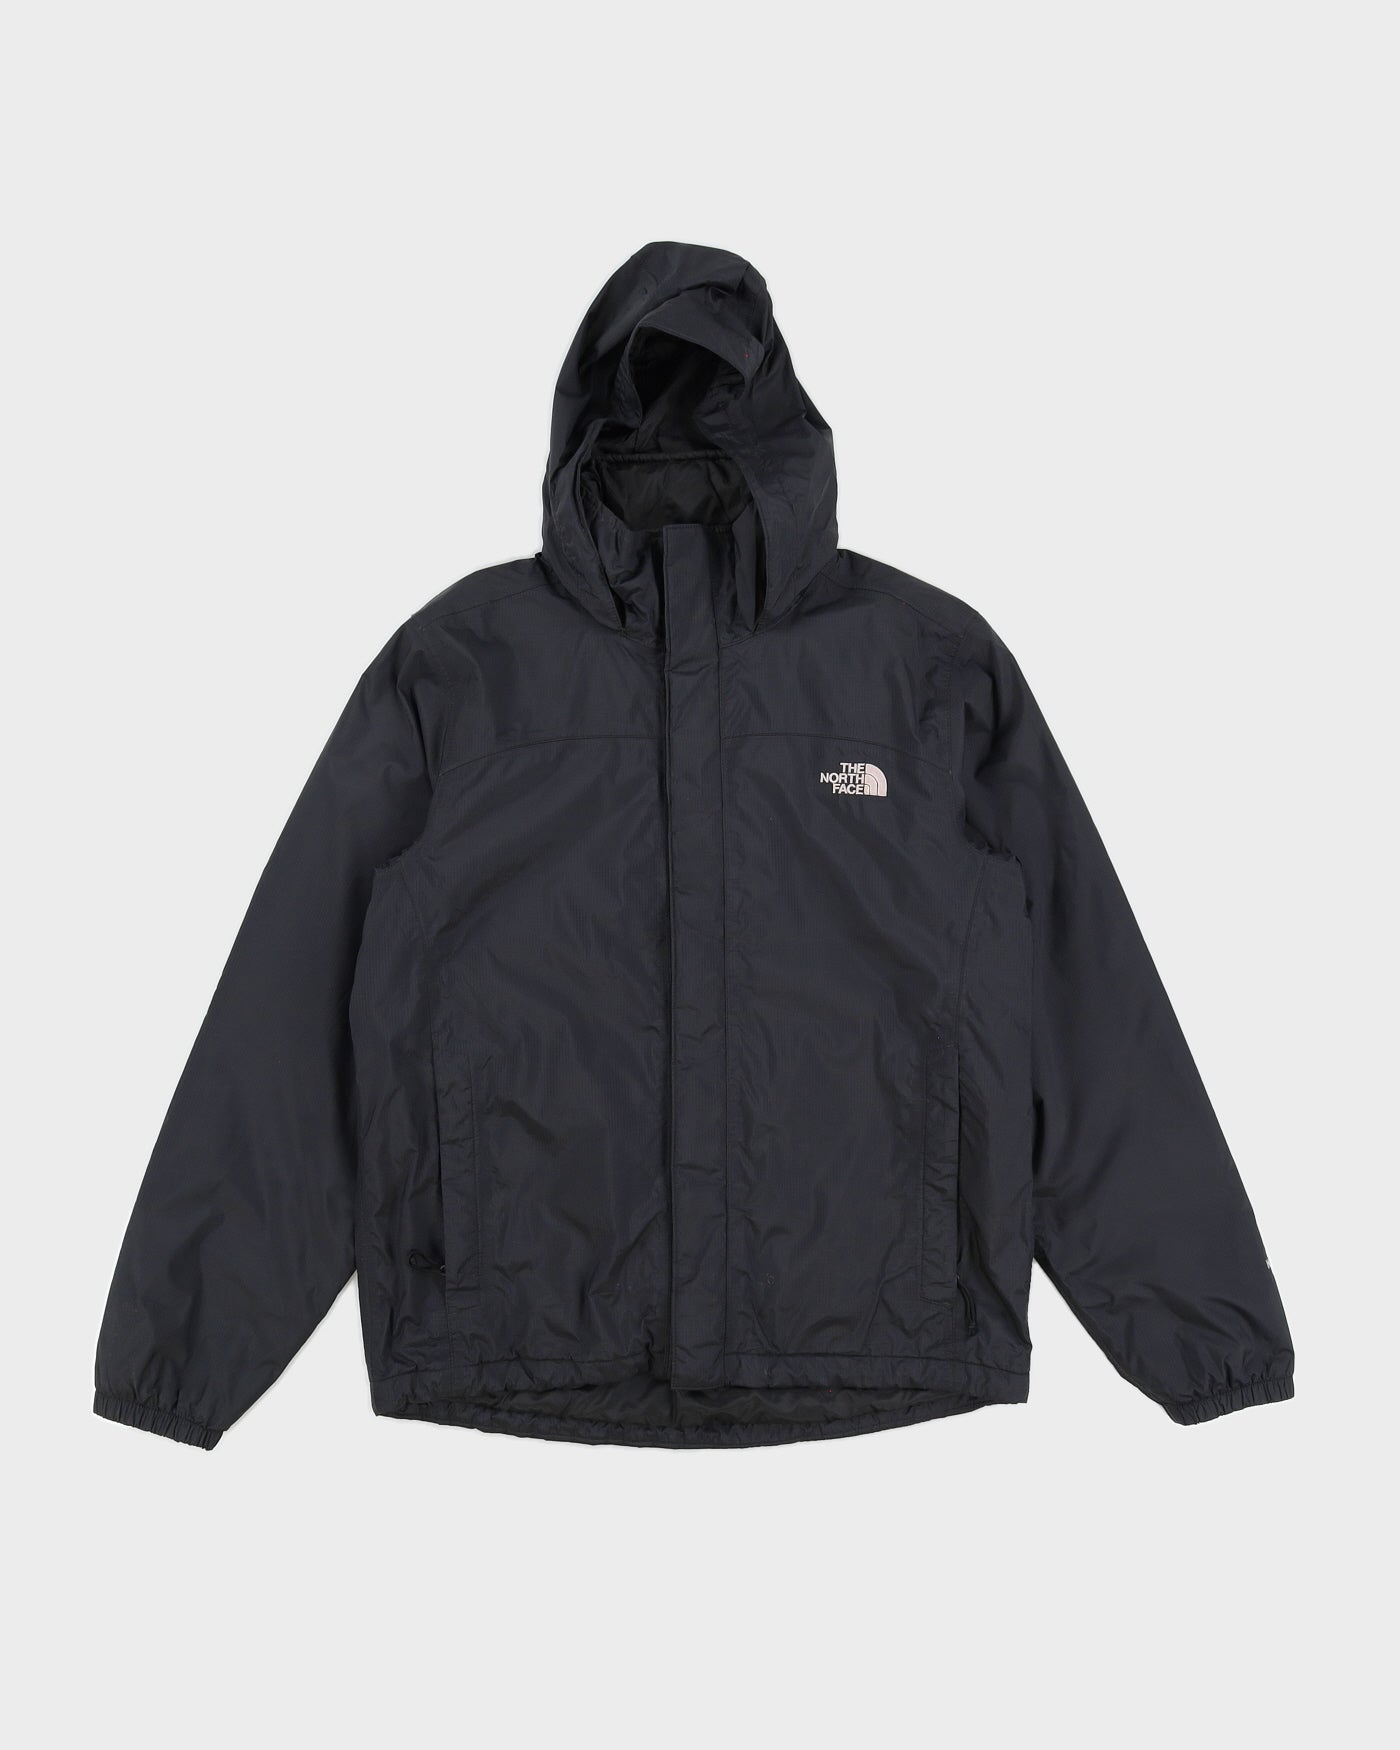 The North Face Black HyVent Hooded Jacket - M